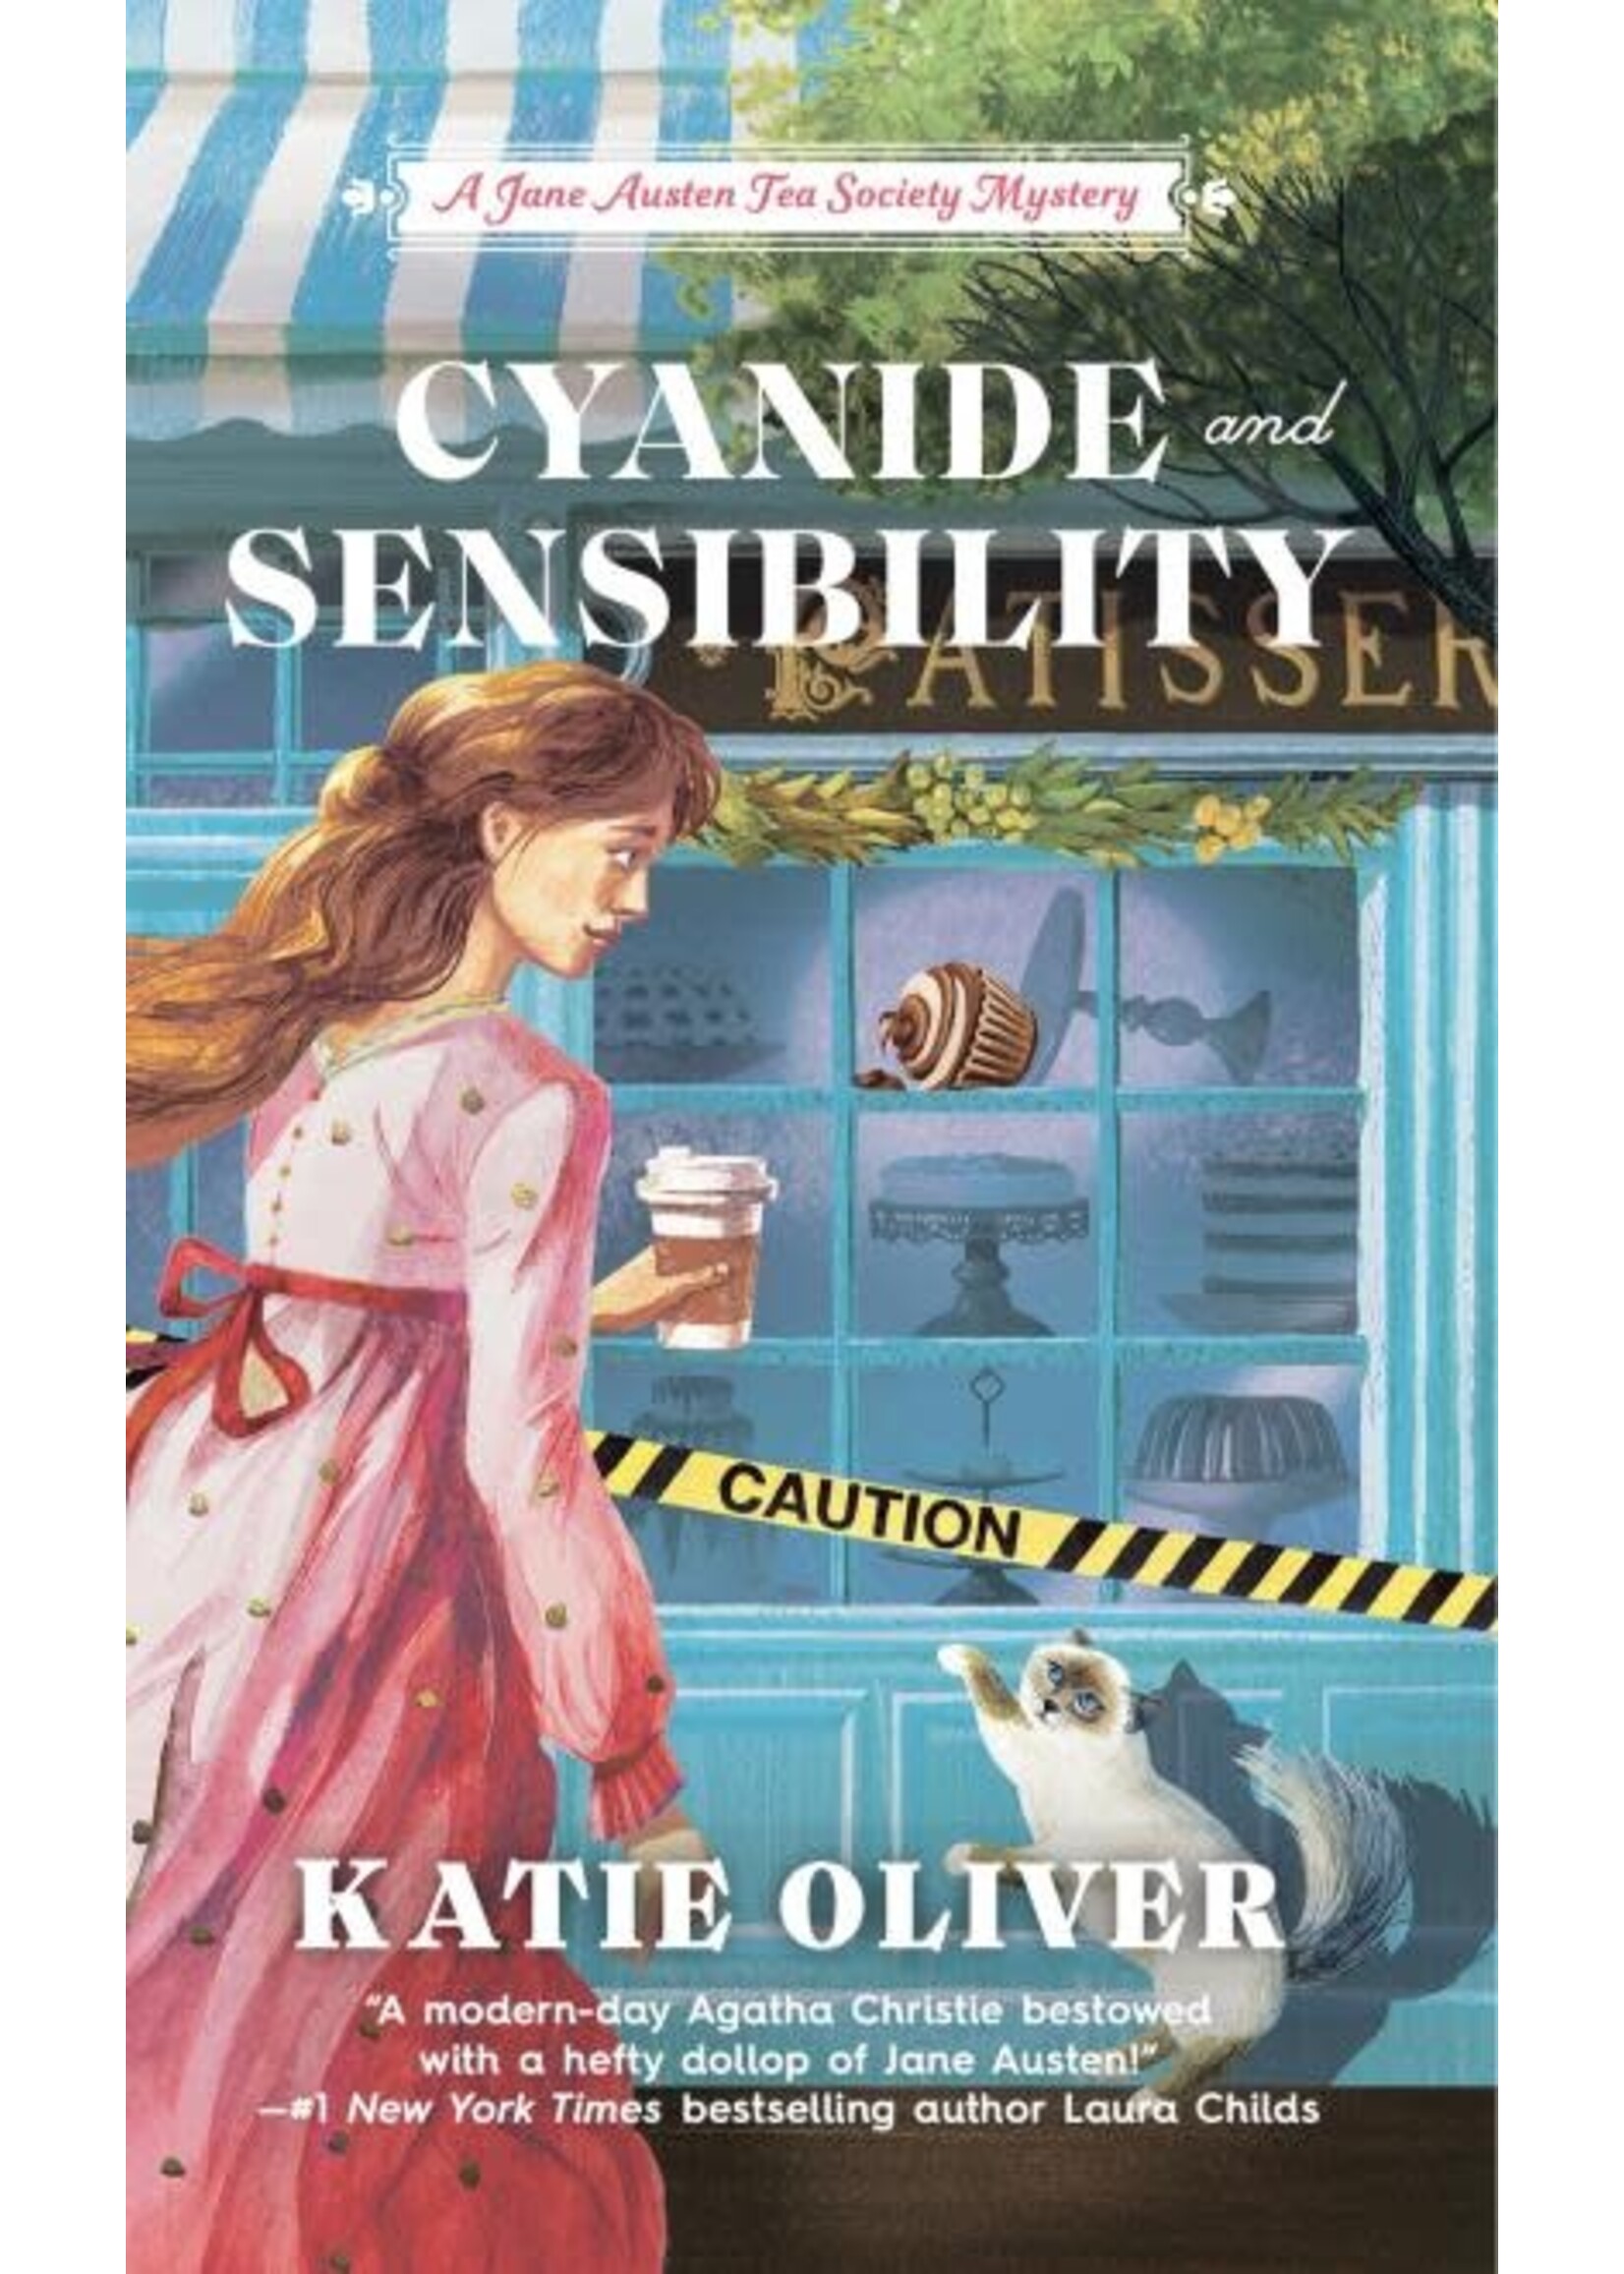 Cyanide and Sensibility (Jane Austen Tea Society Mystery #3) by Katie Oliver